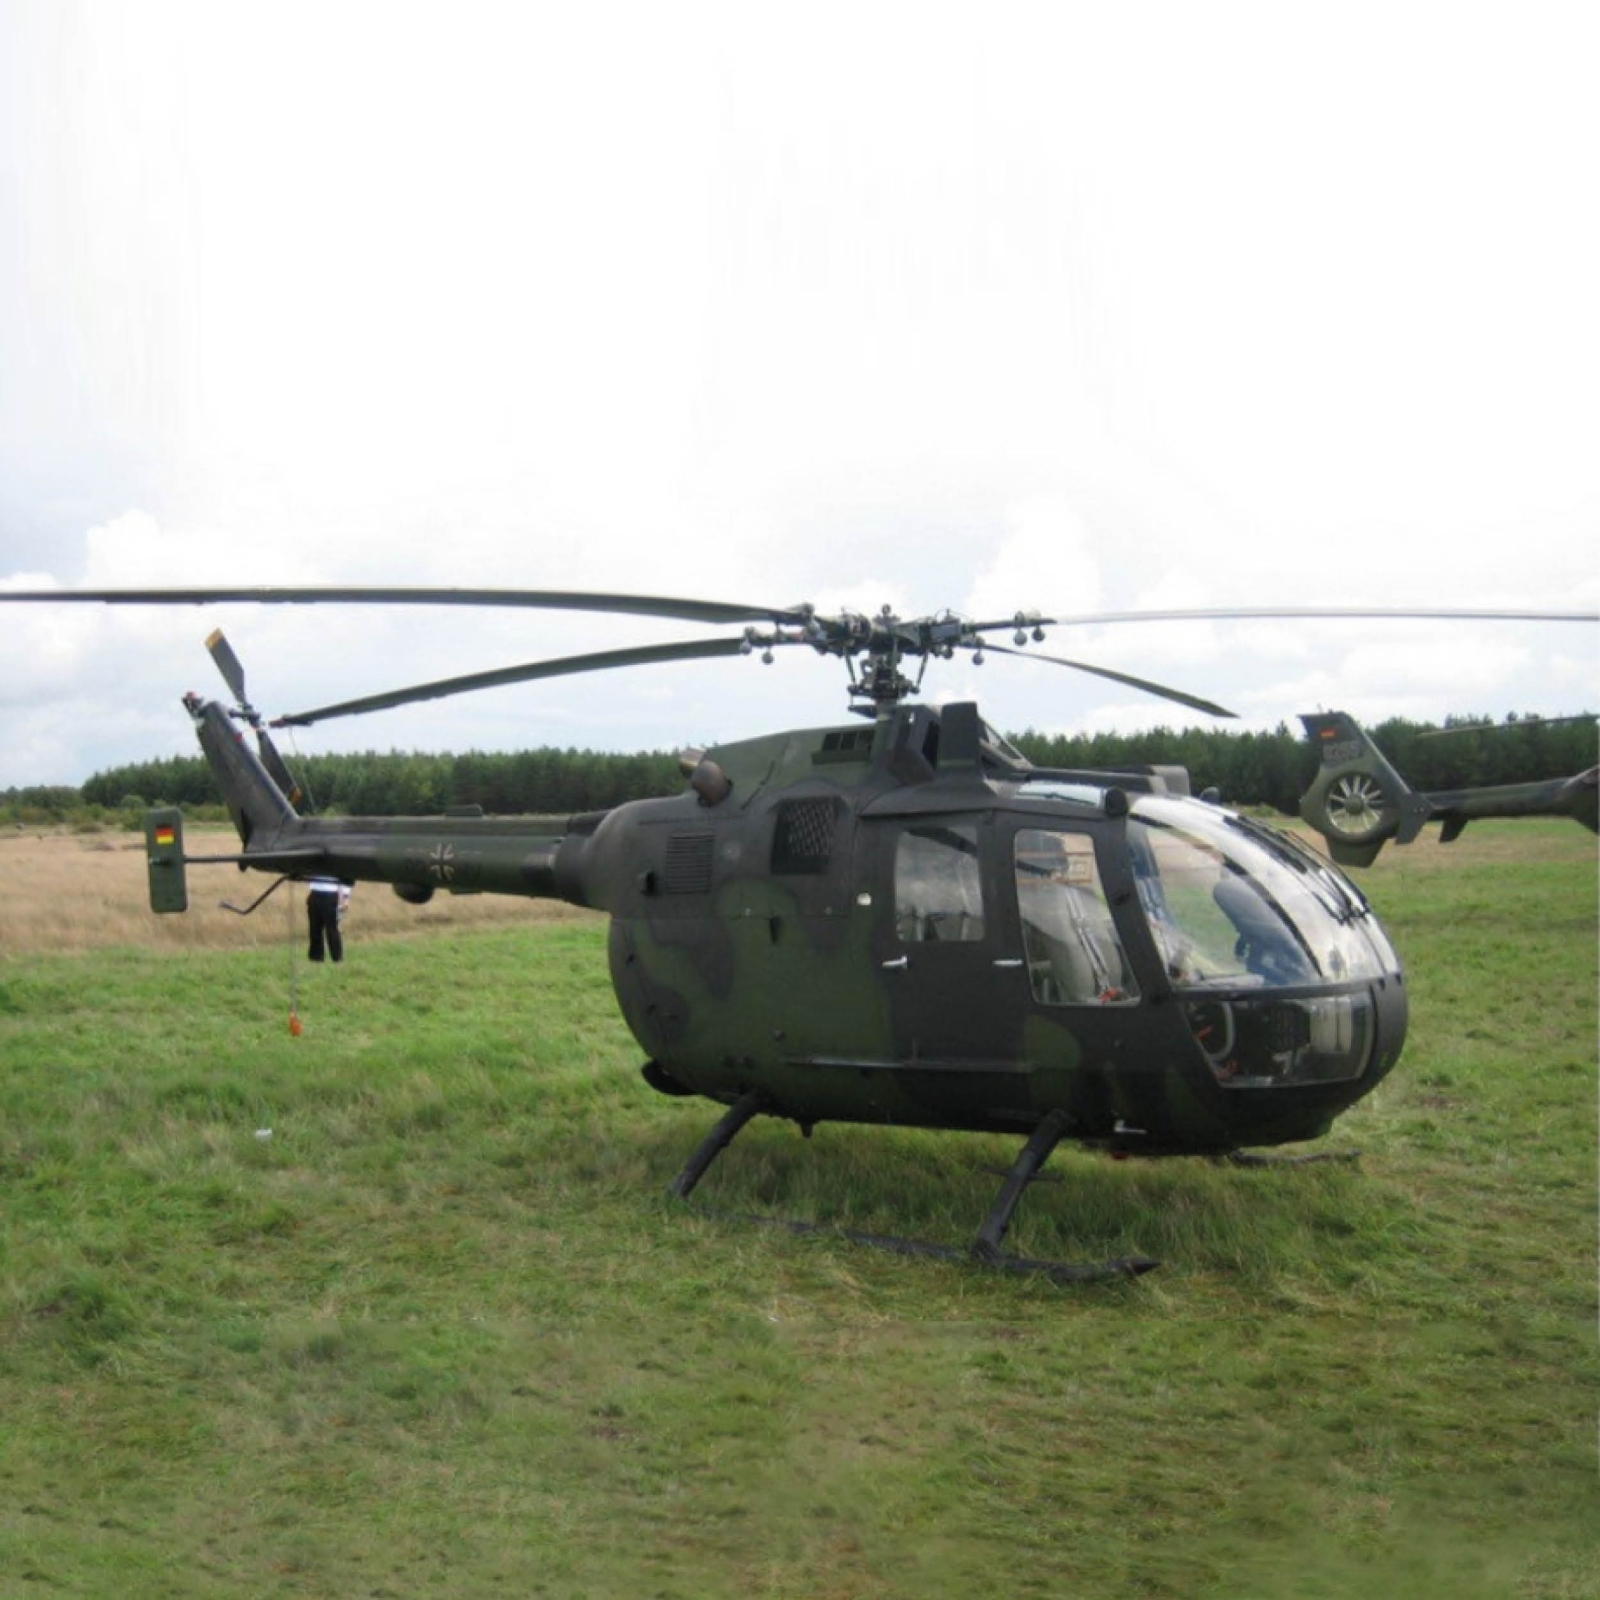 Aviationtag Bundeswehr Helicopter Bo 105 - 86+14 Green